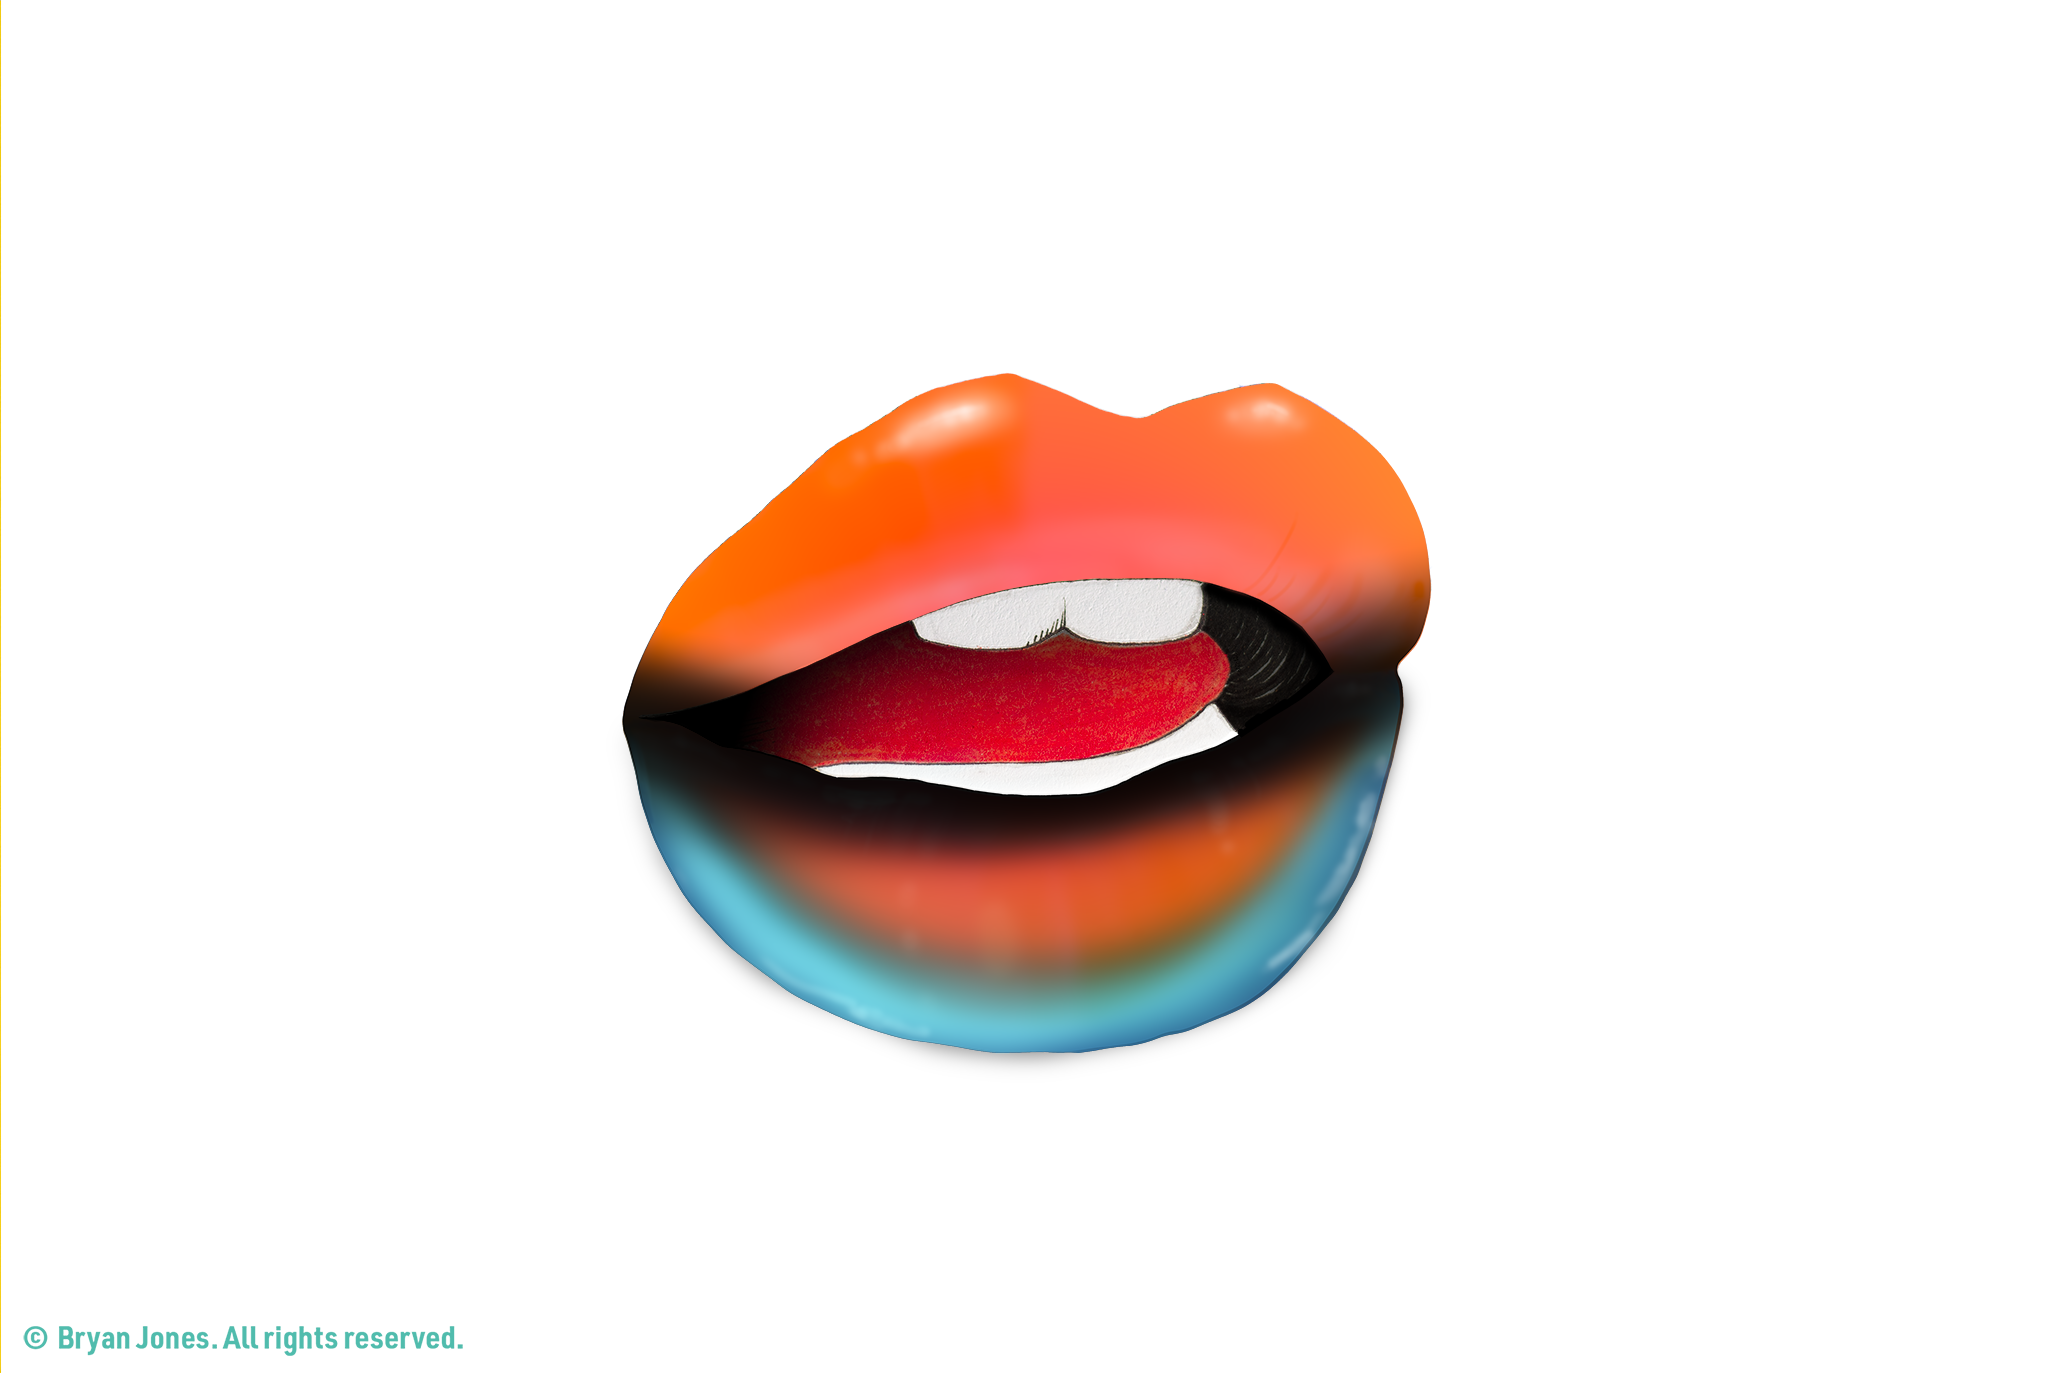 Graphic of Human lips with themed visual representations